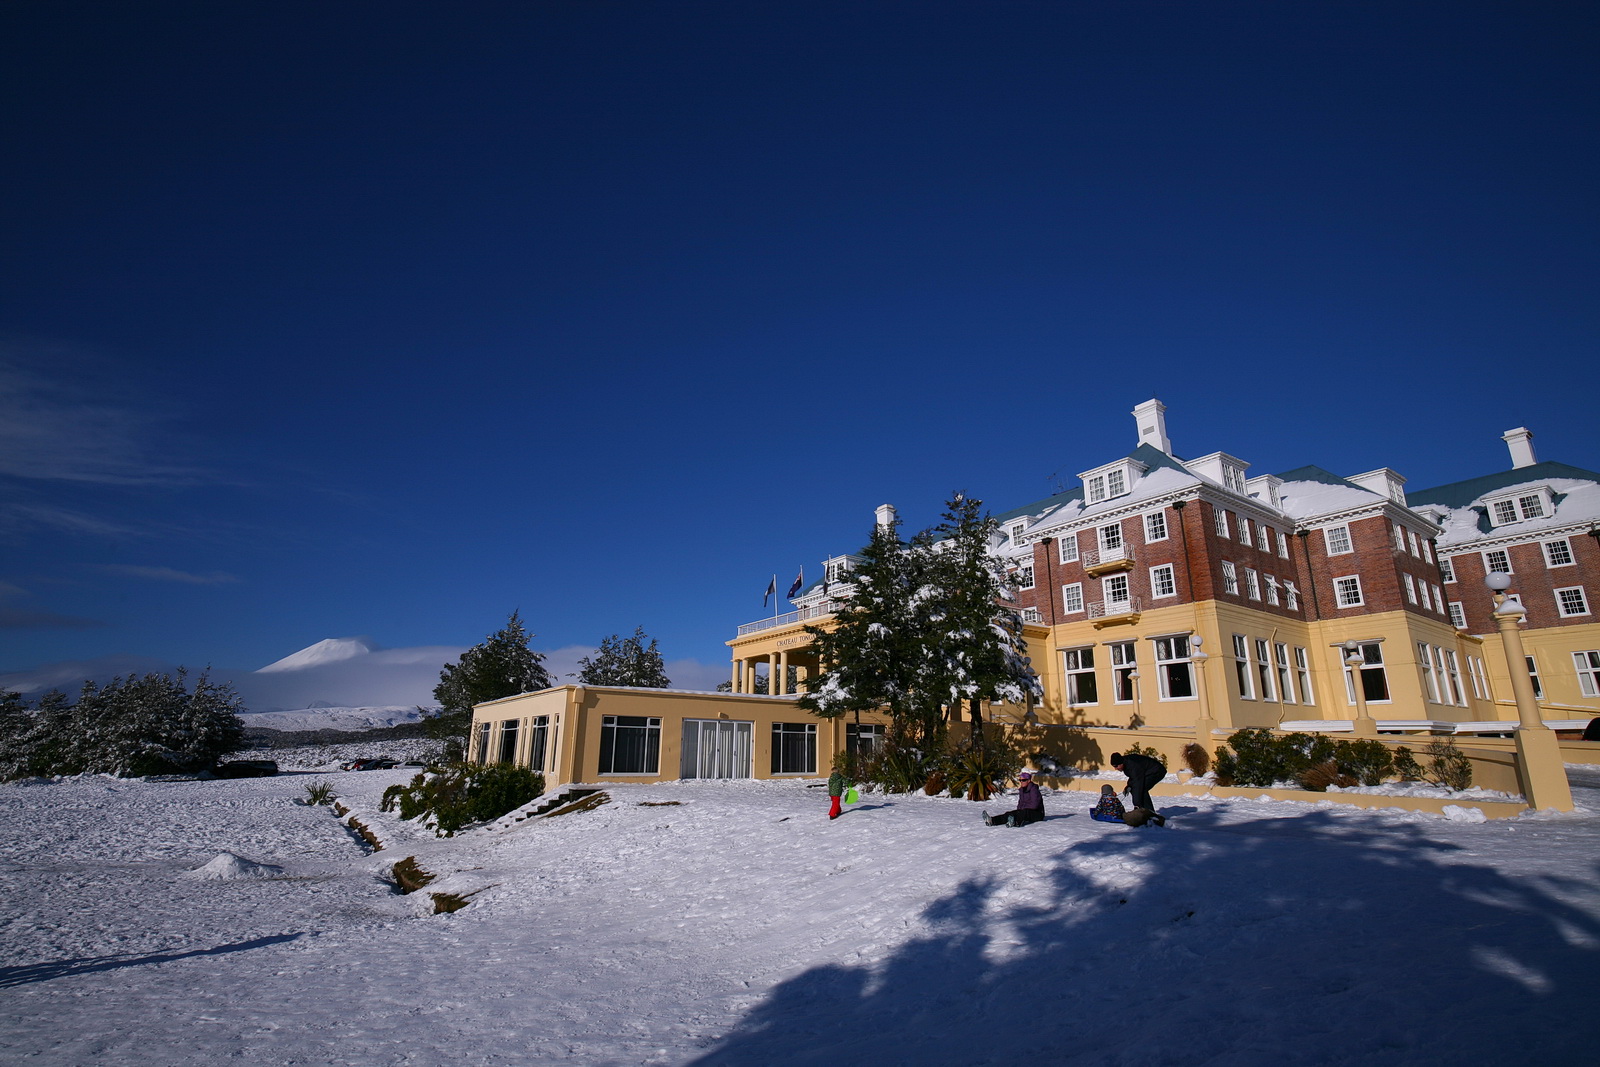 Chateau Tongariro Hotel in winter, a great summer spot for us too; opulent old-world charm - NZ's Raj perhaps?!